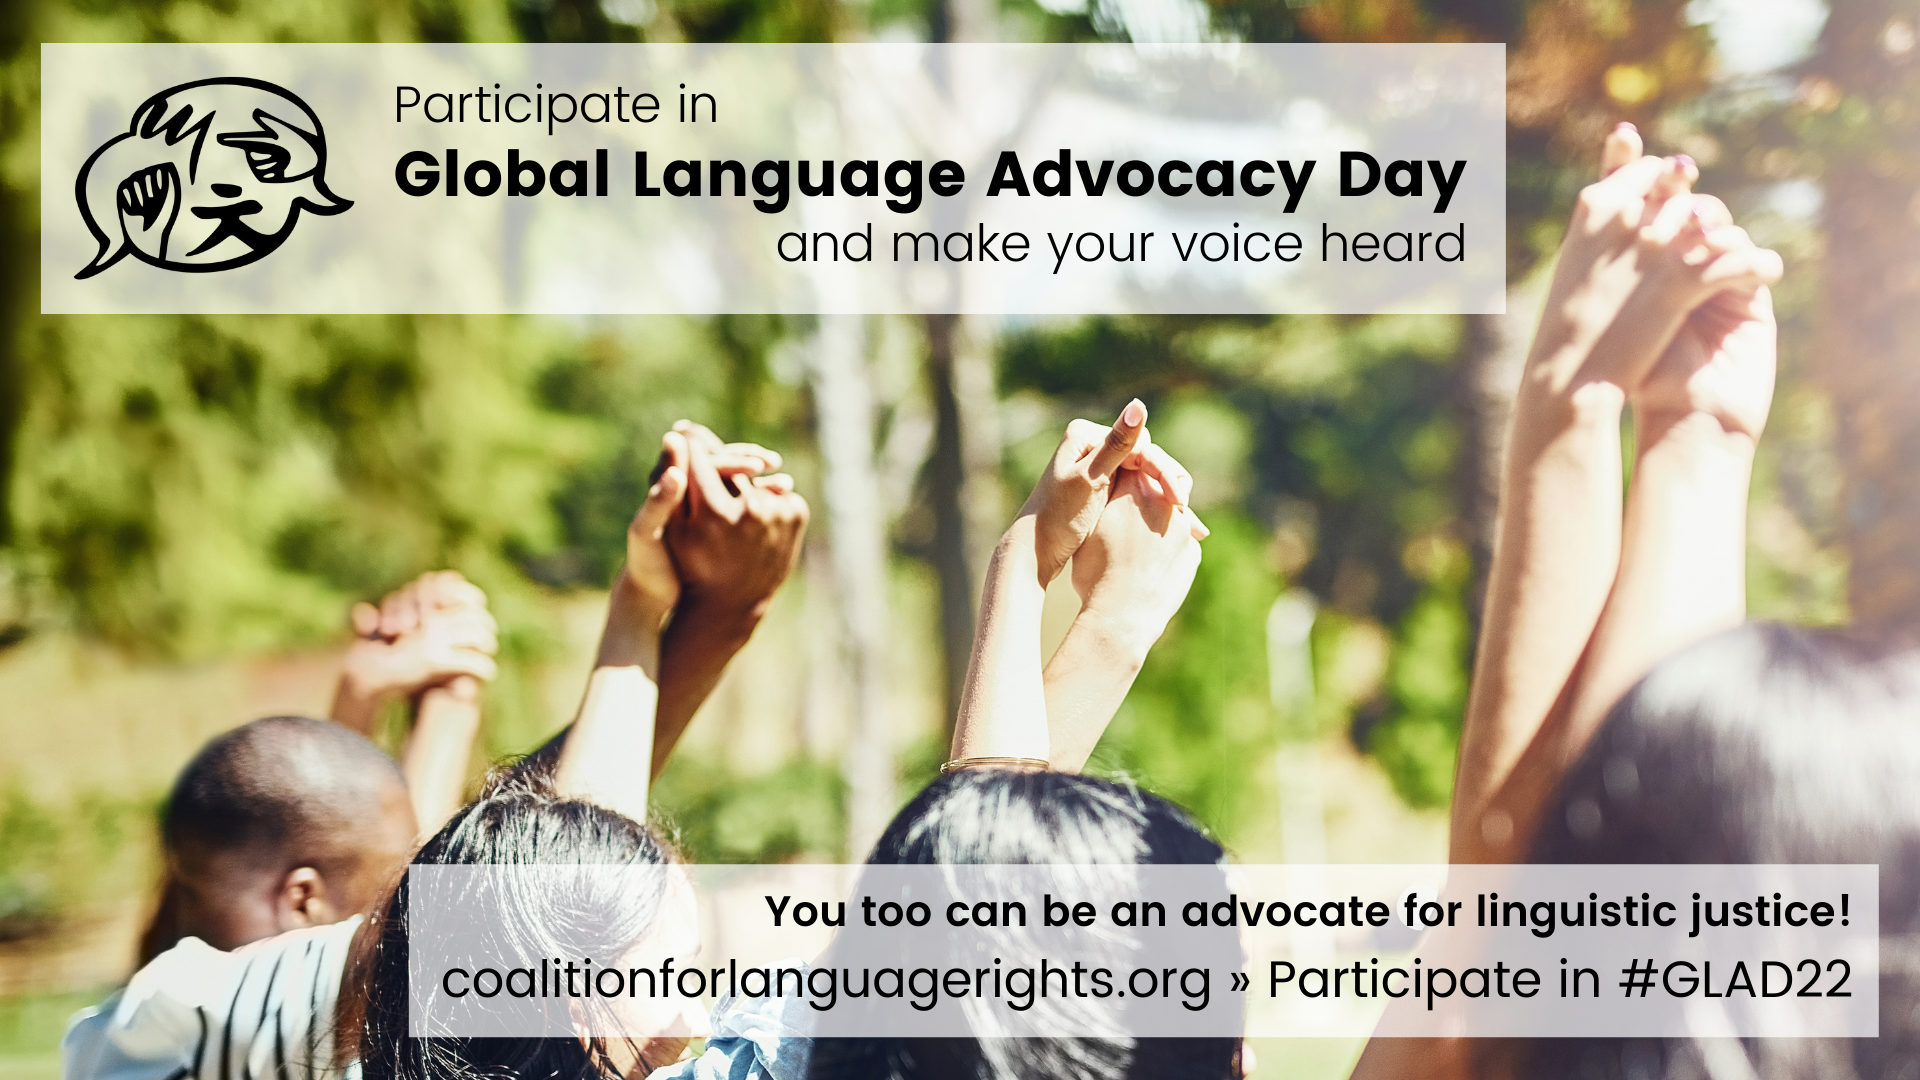 Participate in Global Language Advocacy Day and make your voice heard. You too can be an advocate for linguistic justice!